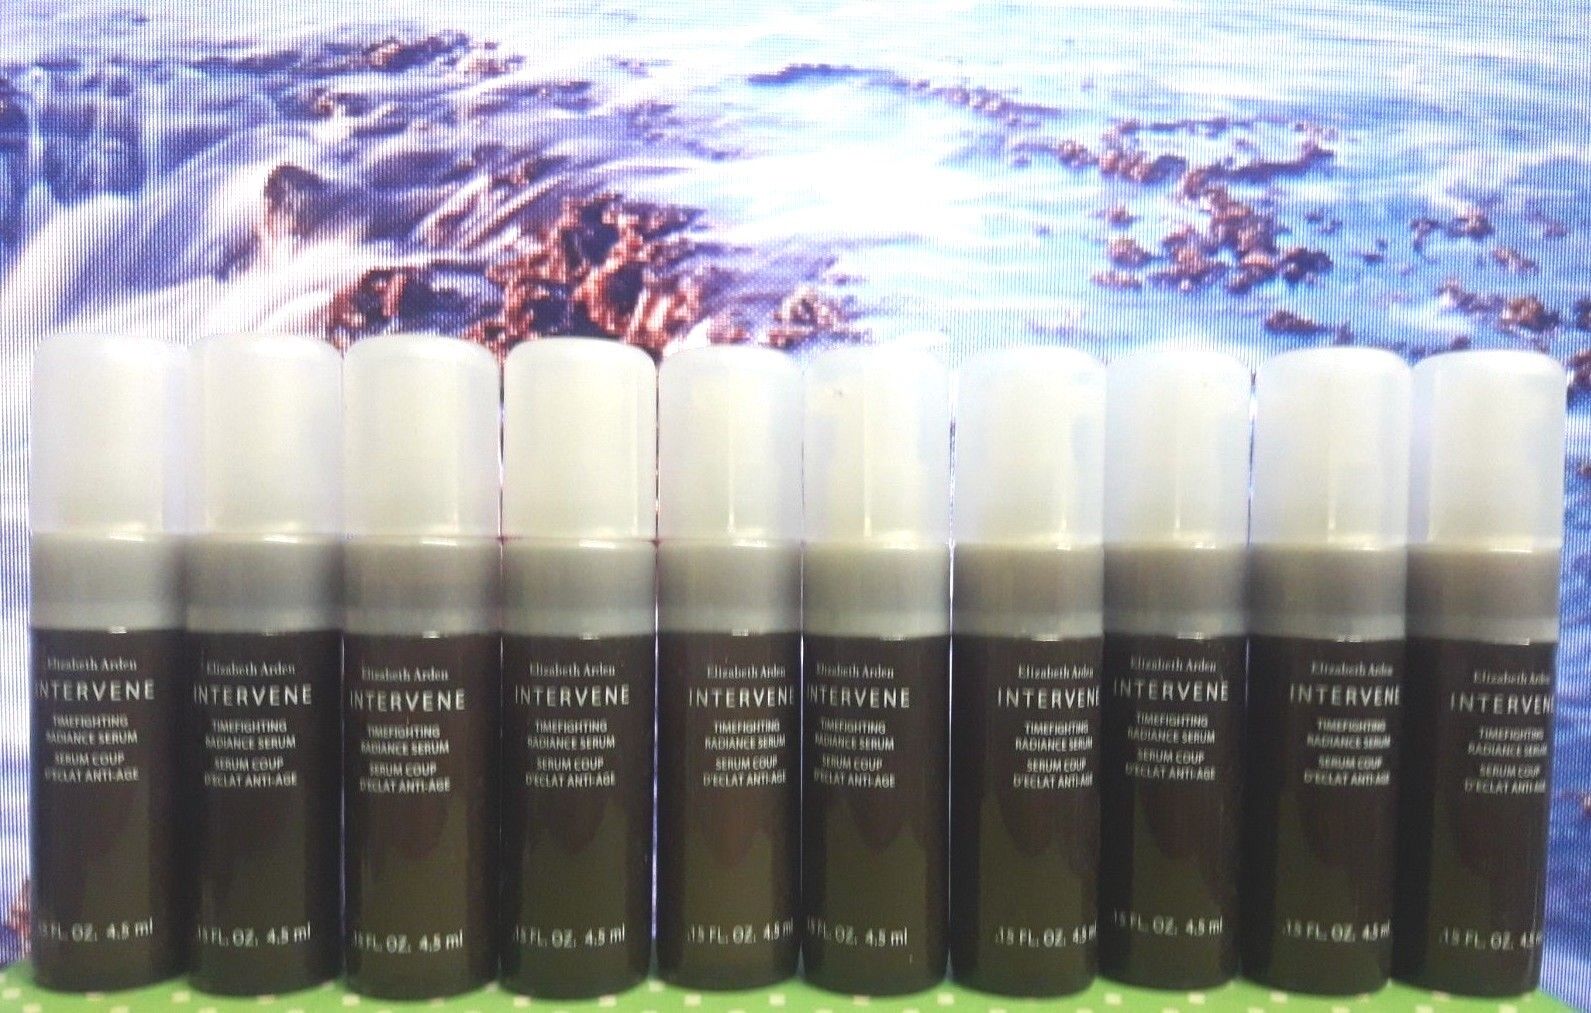 timefighters anti aging formula